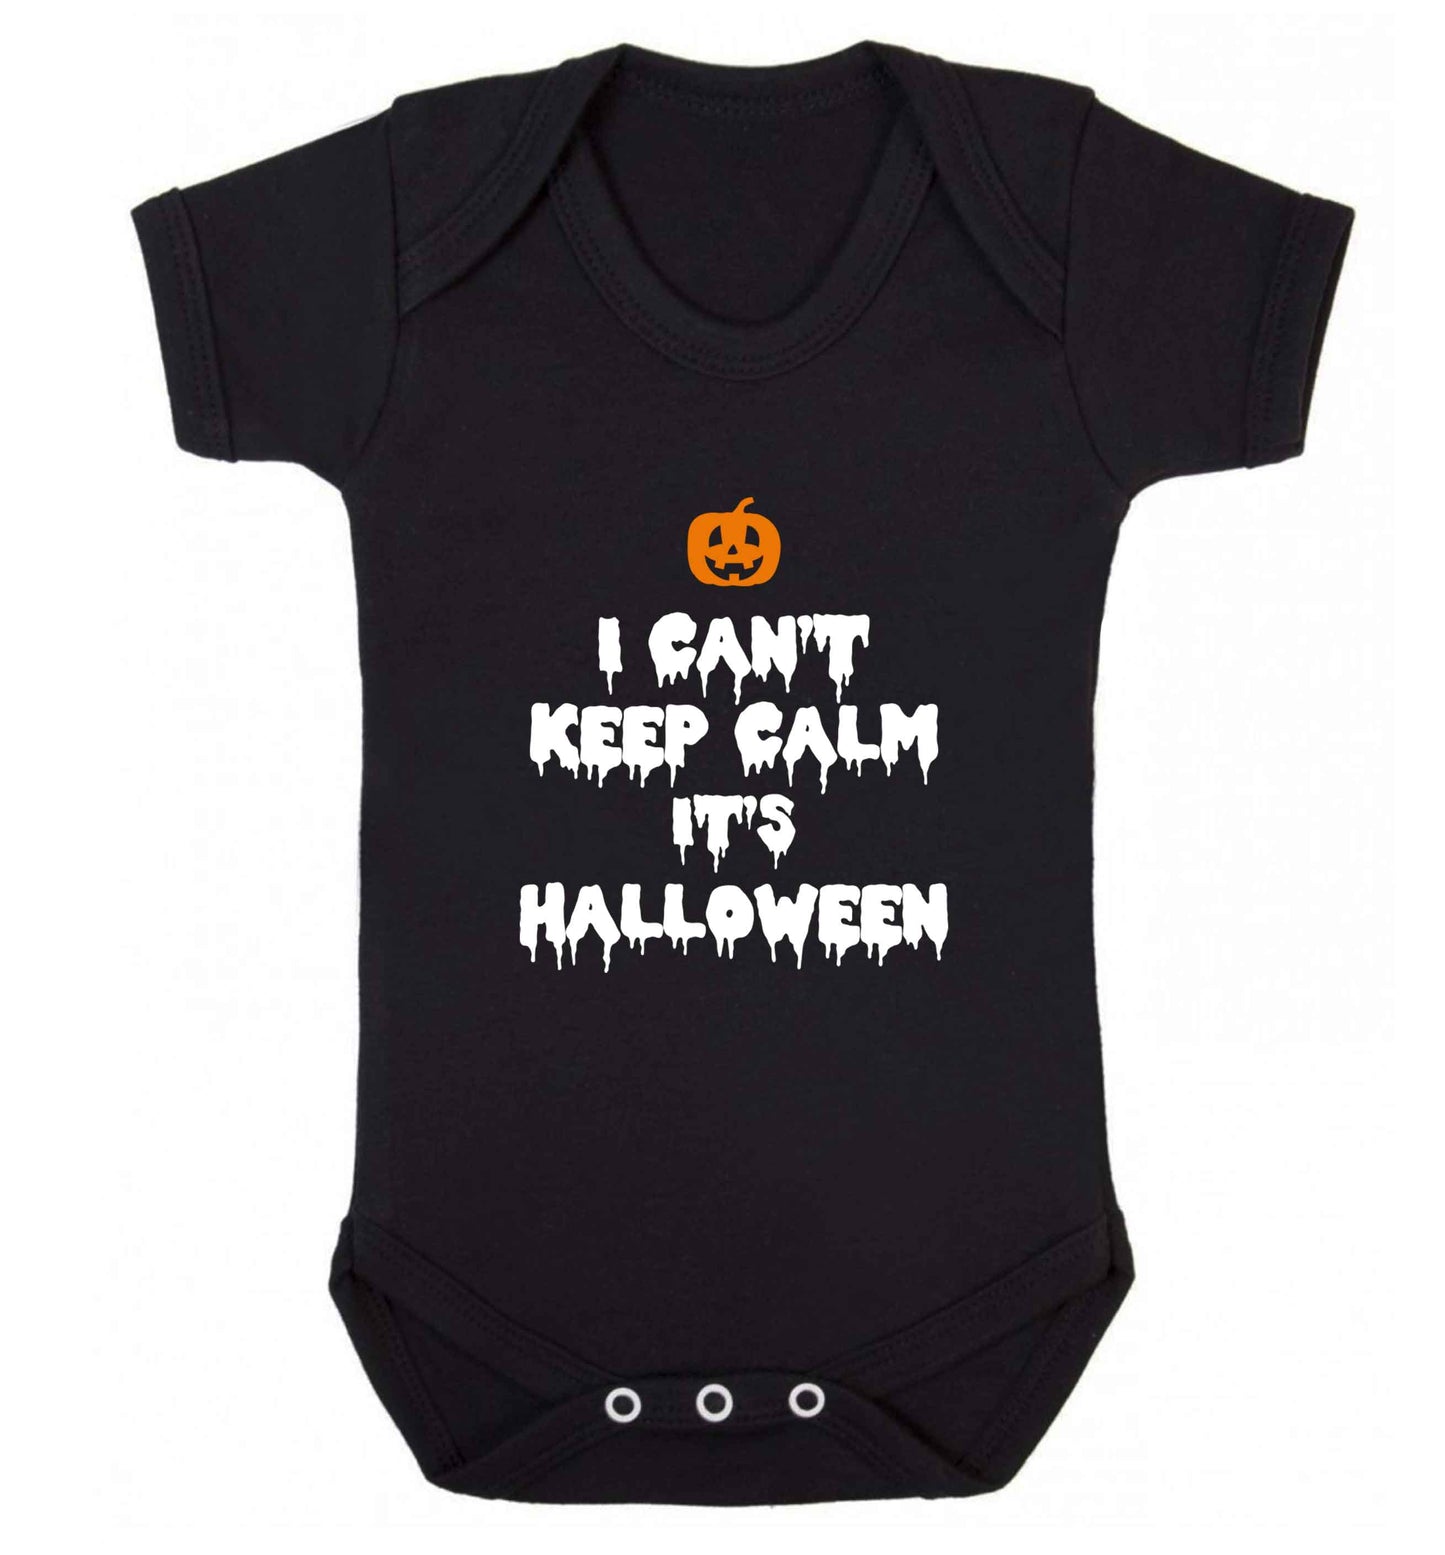 I can't keep calm it's halloween baby vest black 18-24 months